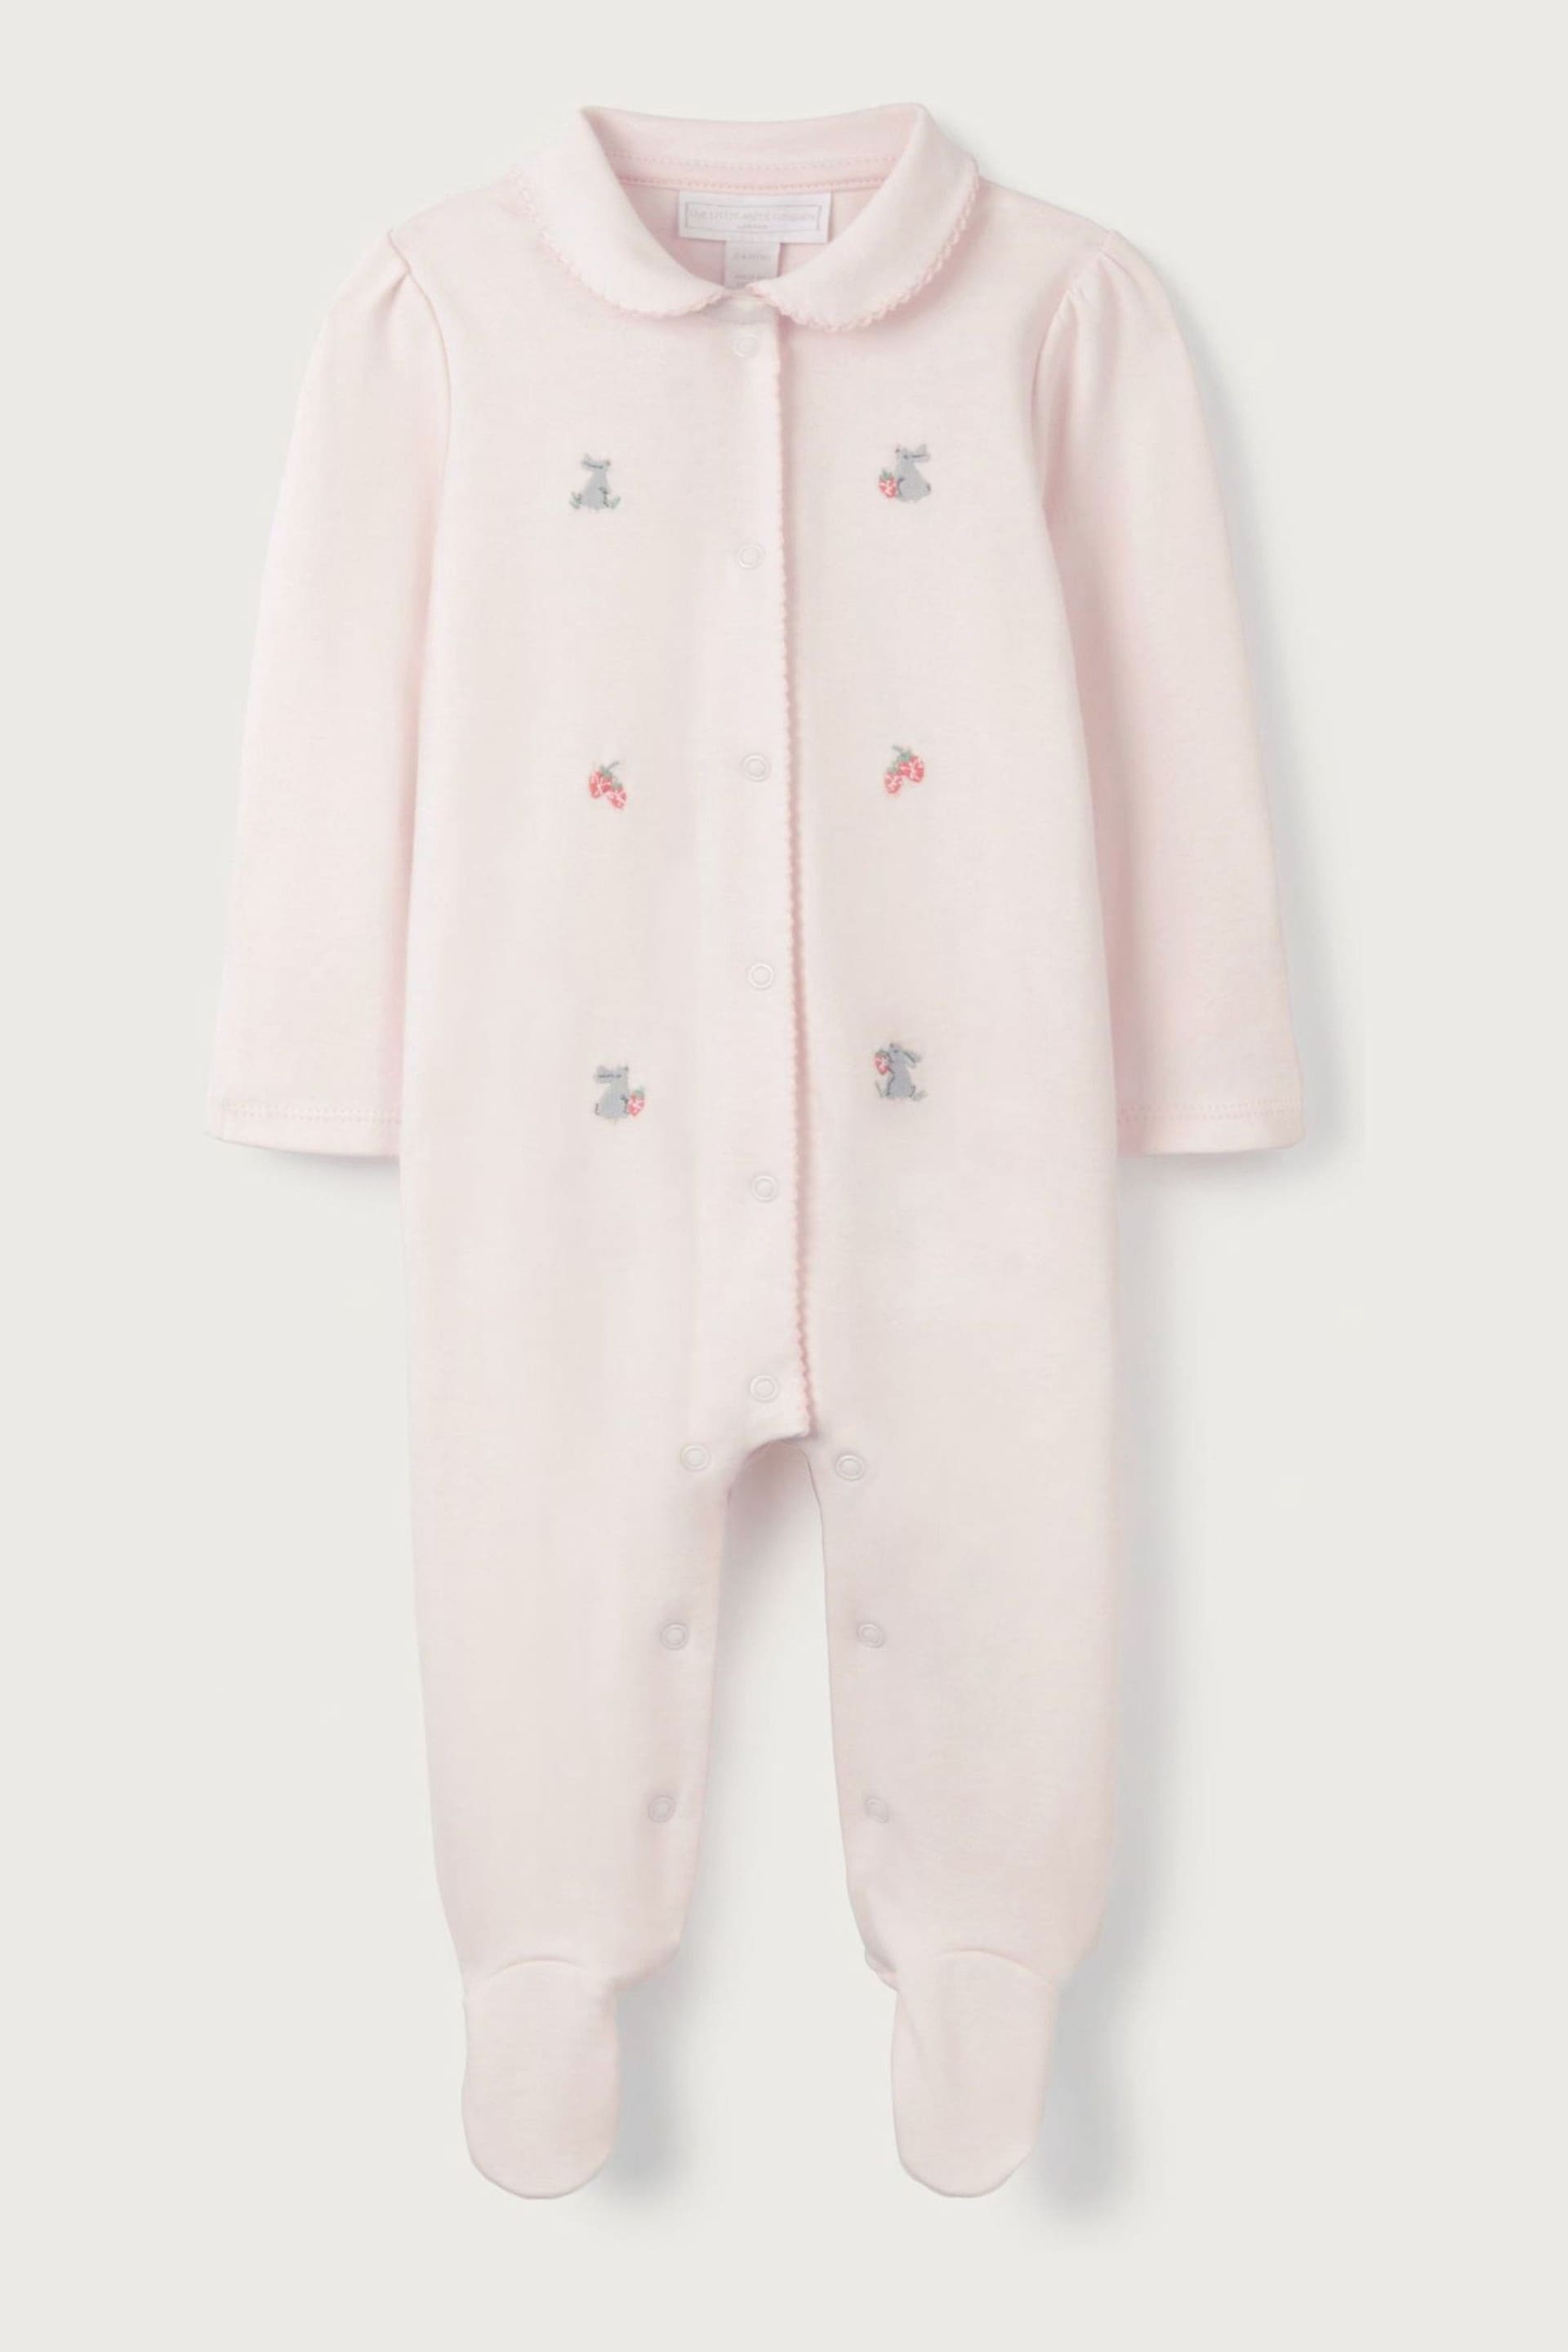 The White Company Pink Organic Cotton Hoppy Bunny Embroidered Collared Sleepsuit - Image 3 of 4